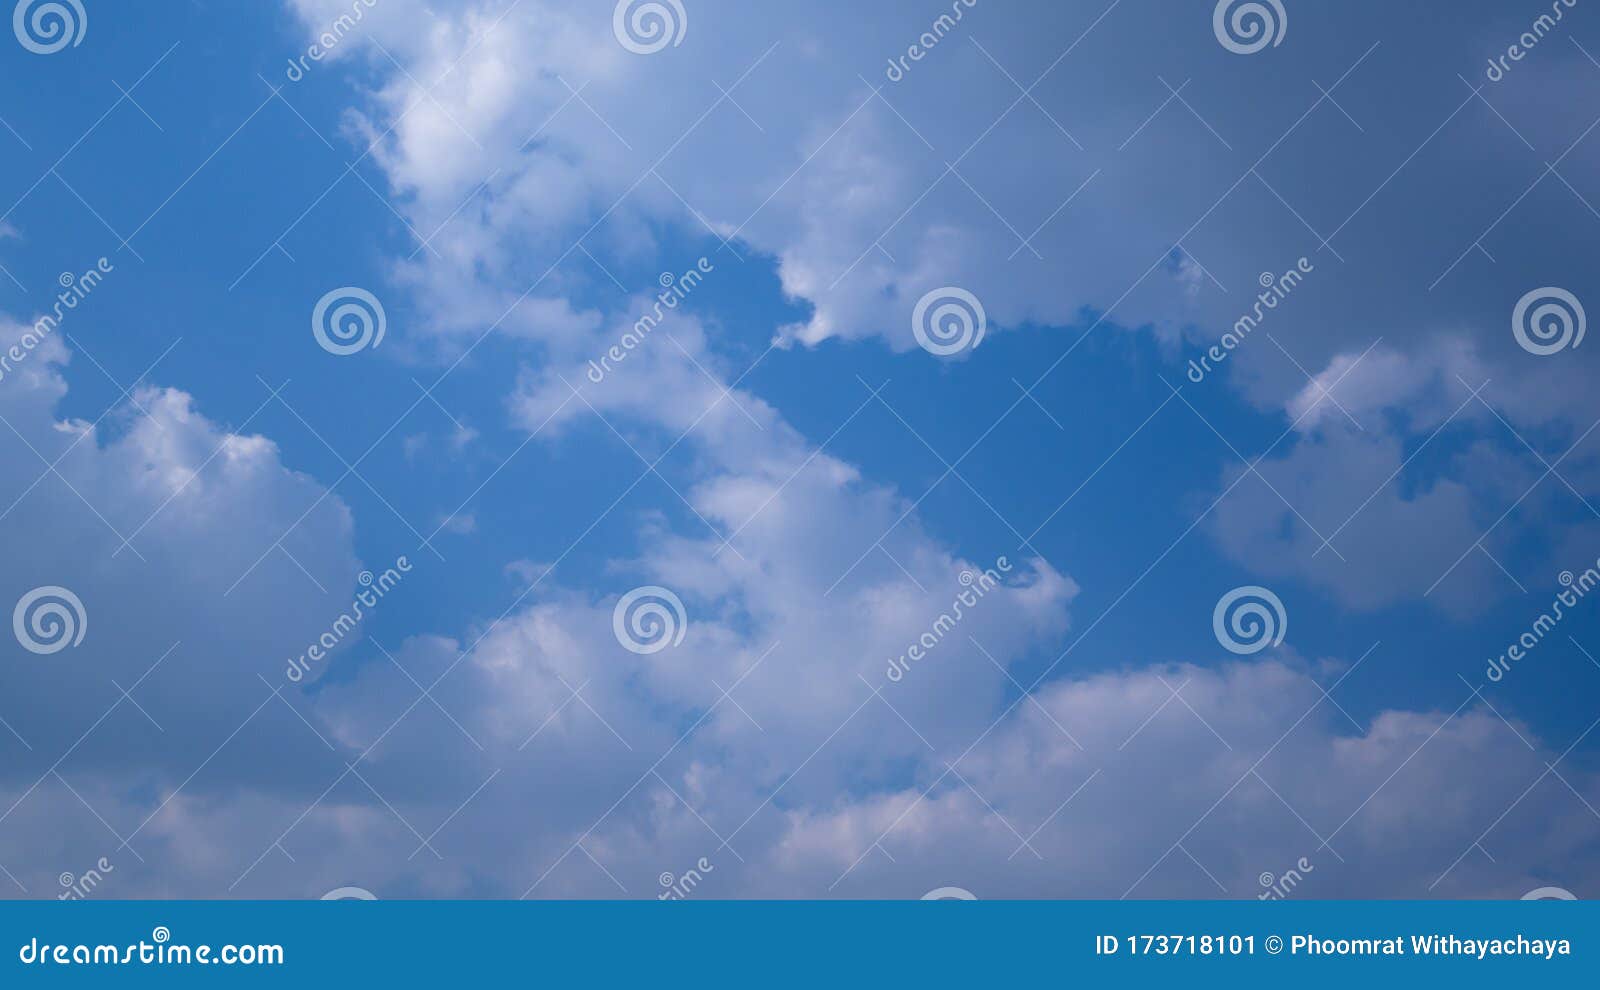 Stunning Blue Sky Horizontal with Beautiful Puffy Fluffy Clouds with ...